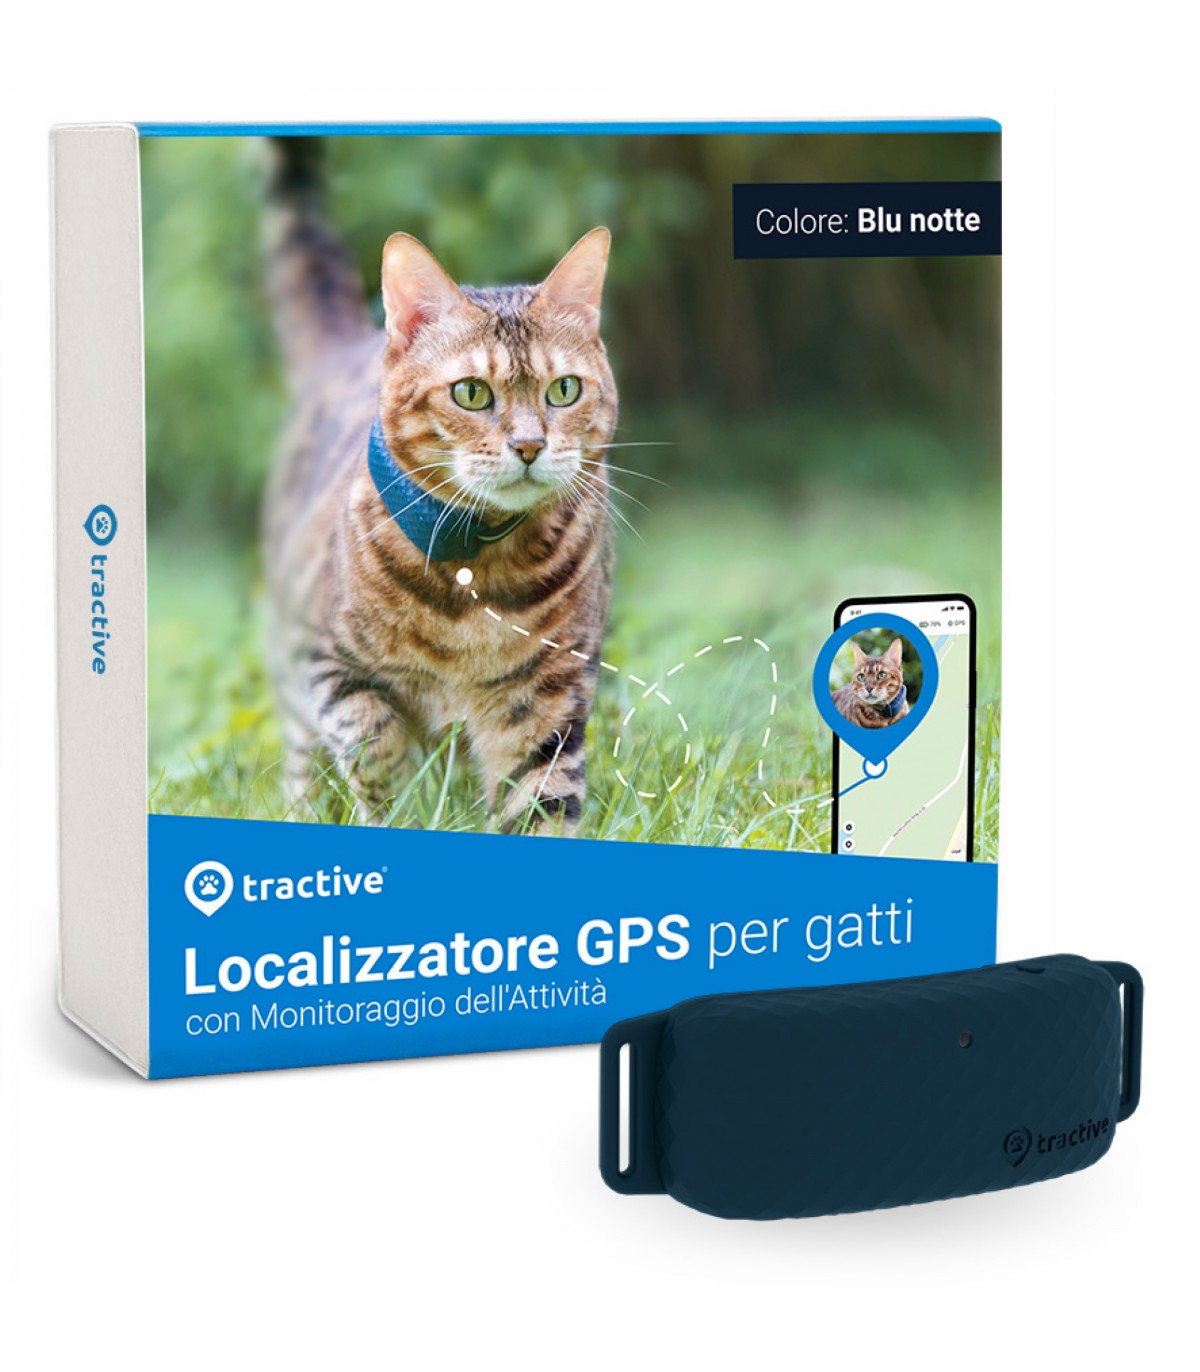 Collare GPS Tracker for cats